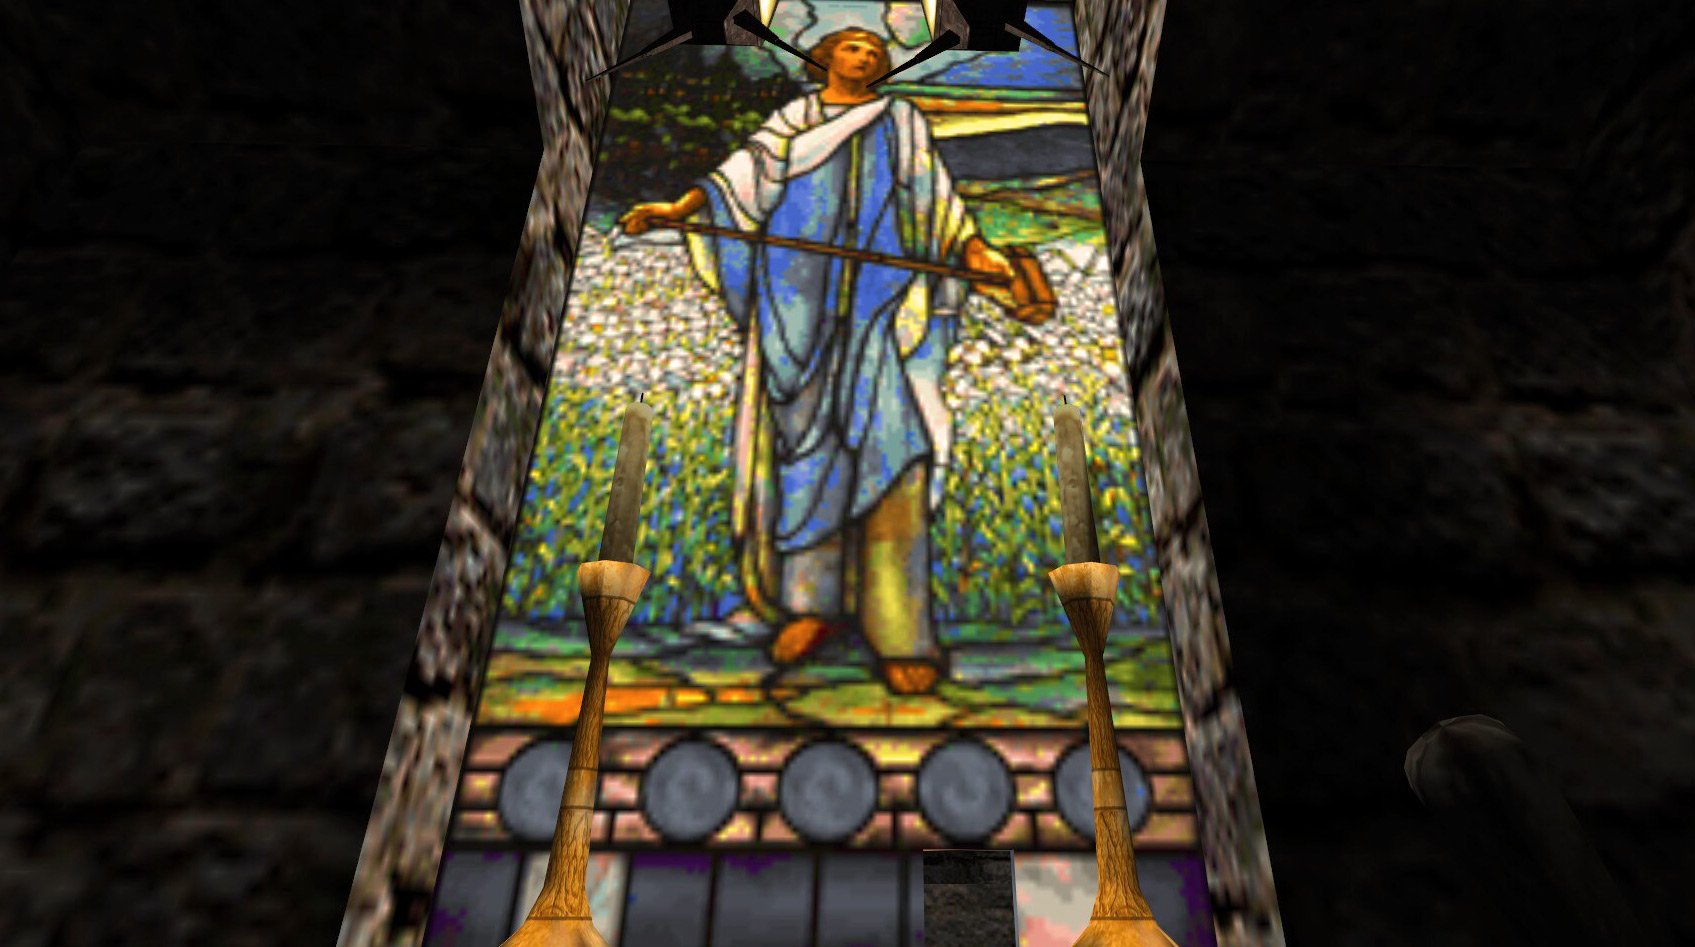 Stained glass window showing a robed figure holding a hammer in both hands.